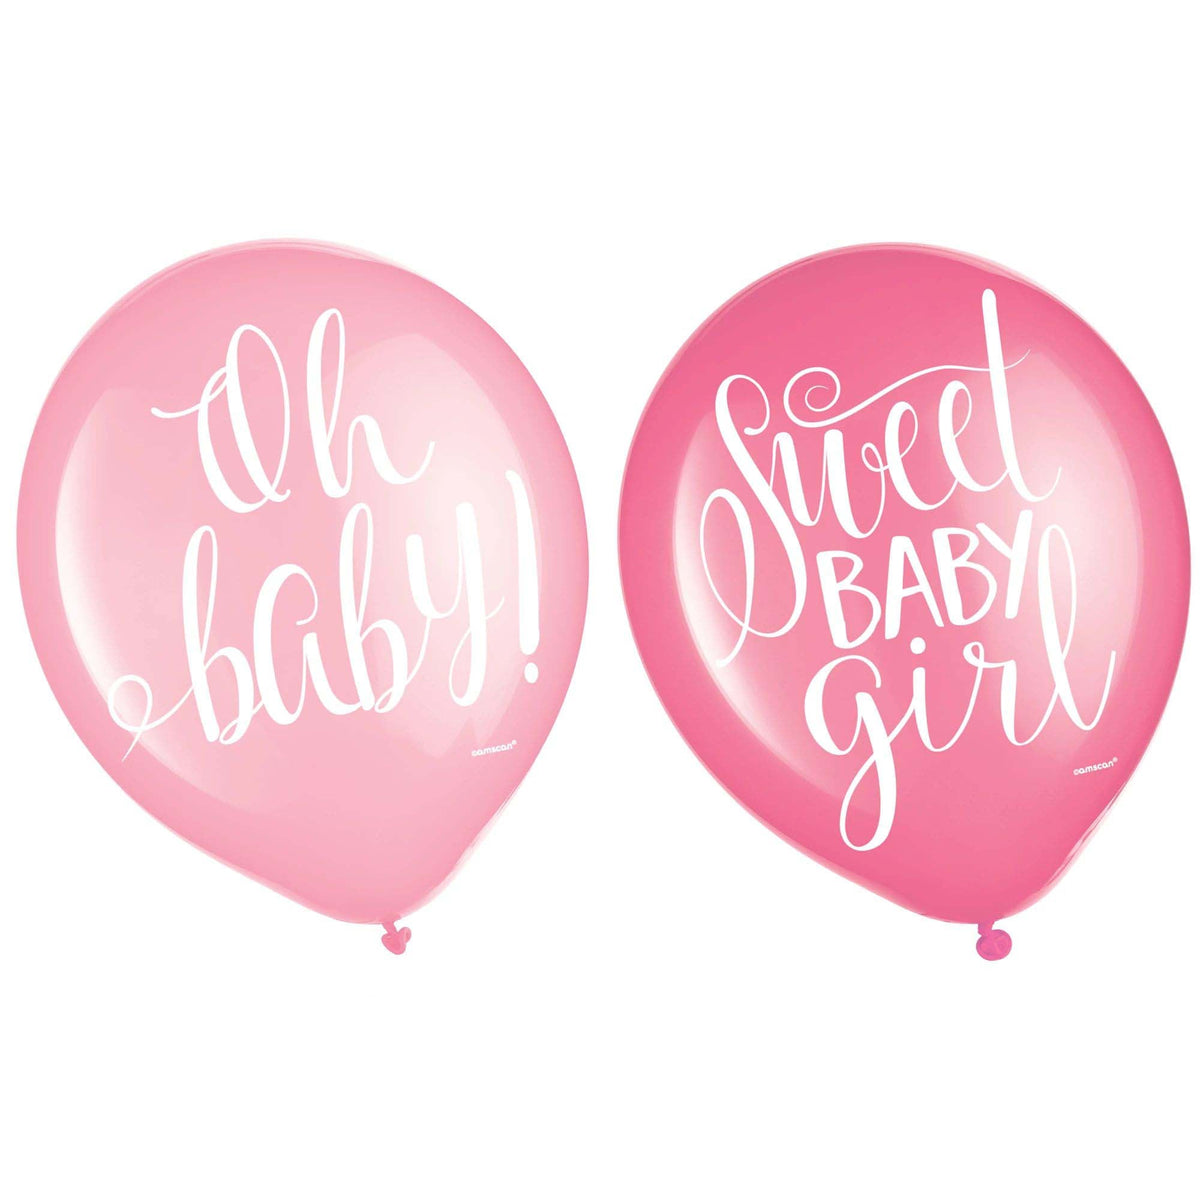 AMSCAN CA Baby Shower Floral Baby Printed Latex Balloons, Pink, 12 Inches, 6 Count 013051849399